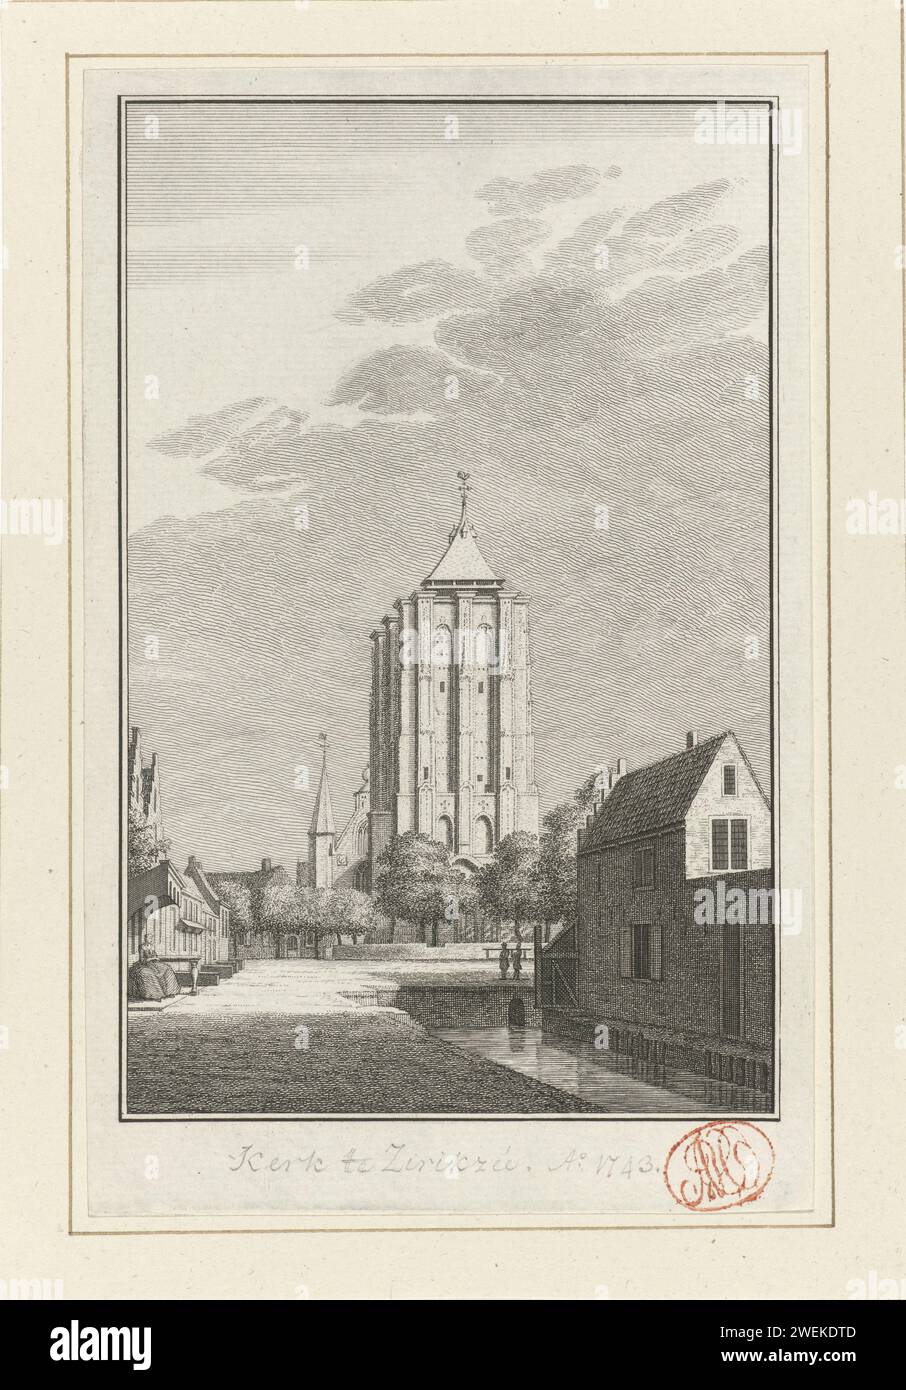 View of the Sint -Liefen Monster Tower in Zierikzee, 1743, Jan Caspar Philips, After Cornelis Pronk, 1743 - 1747 print View of the tower of the Sint-Lievensmonsterkerk in Zierikzee, in the situation around 1743.  paper. pencil etching / engraving parts of church exterior and annexes: tower. church (exterior) Sint-Lievens Monster Tower Stock Photo